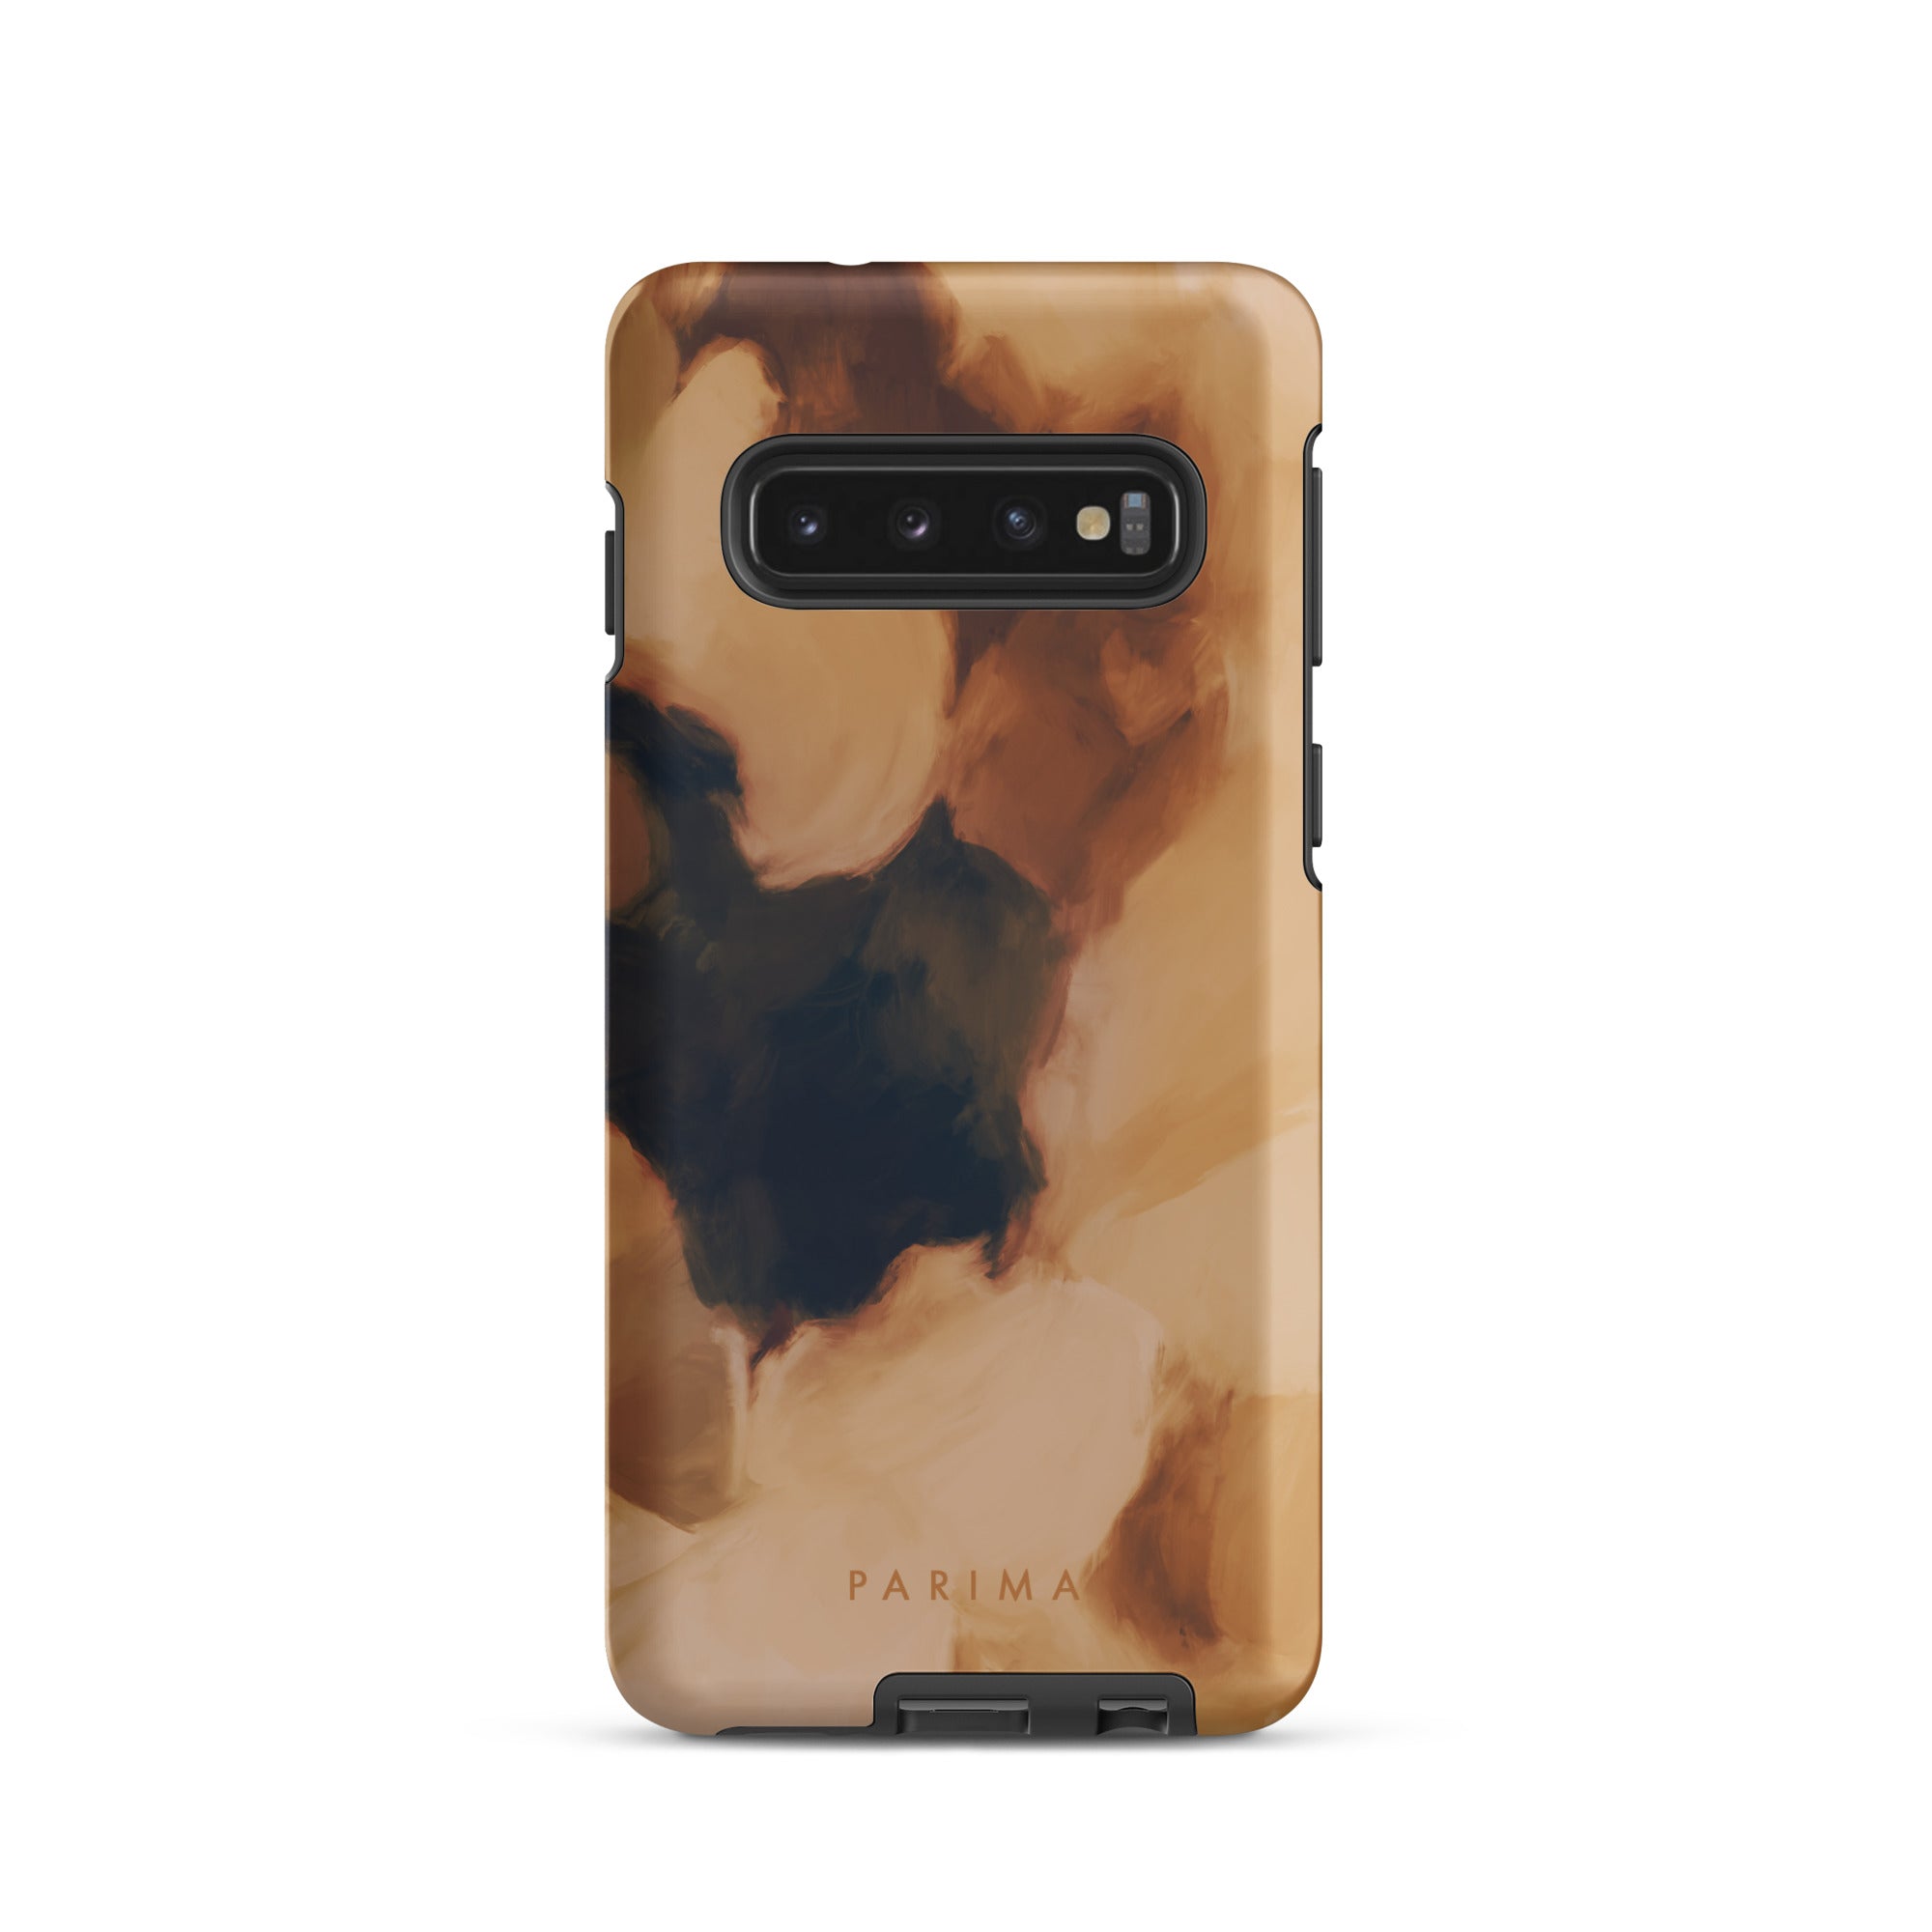 Clay, brown and tan color abstract art on Samsung Galaxy s10 tough case by Parima Studio